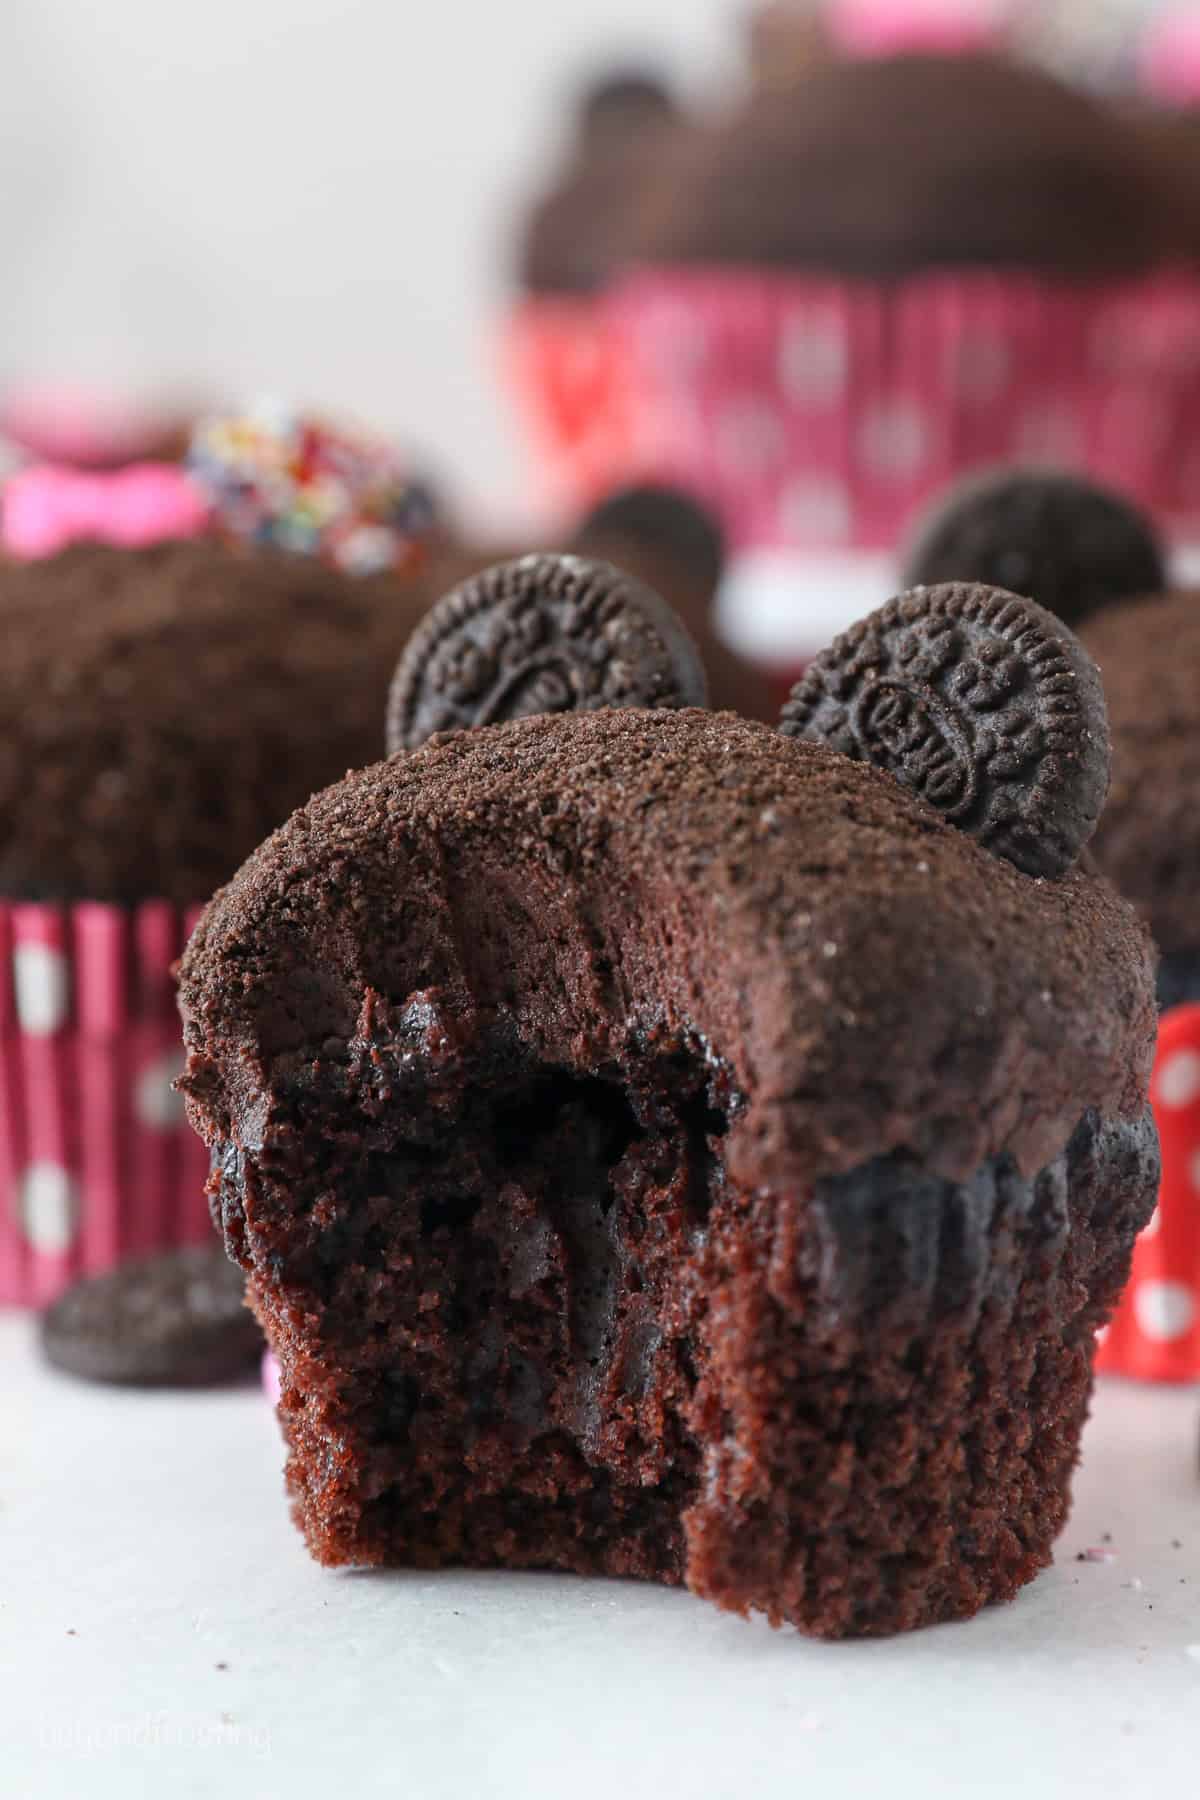 A Mickey Mouse cupcake with a bite missing.